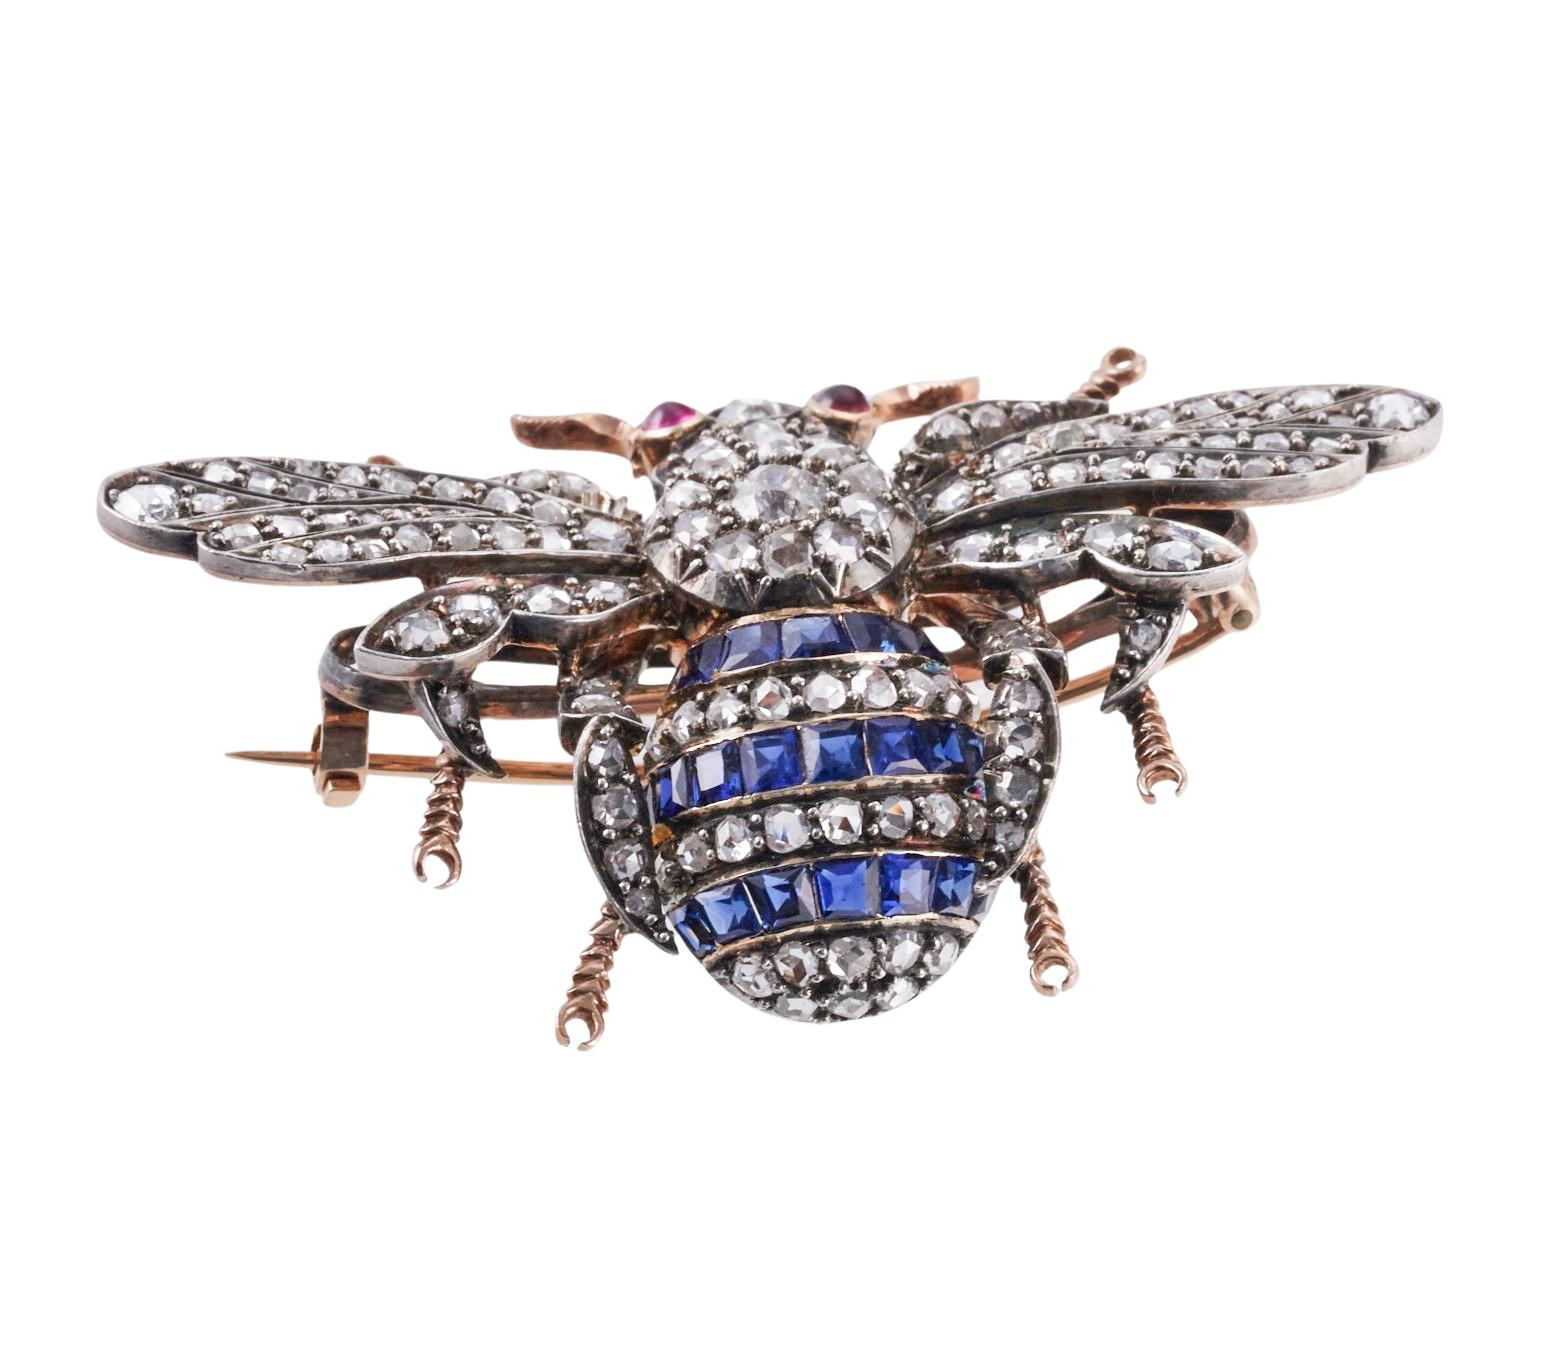 Antique 14k gold and silver bee brooch, adorned with ruby eyes, blue sapphires and rose cut diamonds. The brooch measures 1 3/8